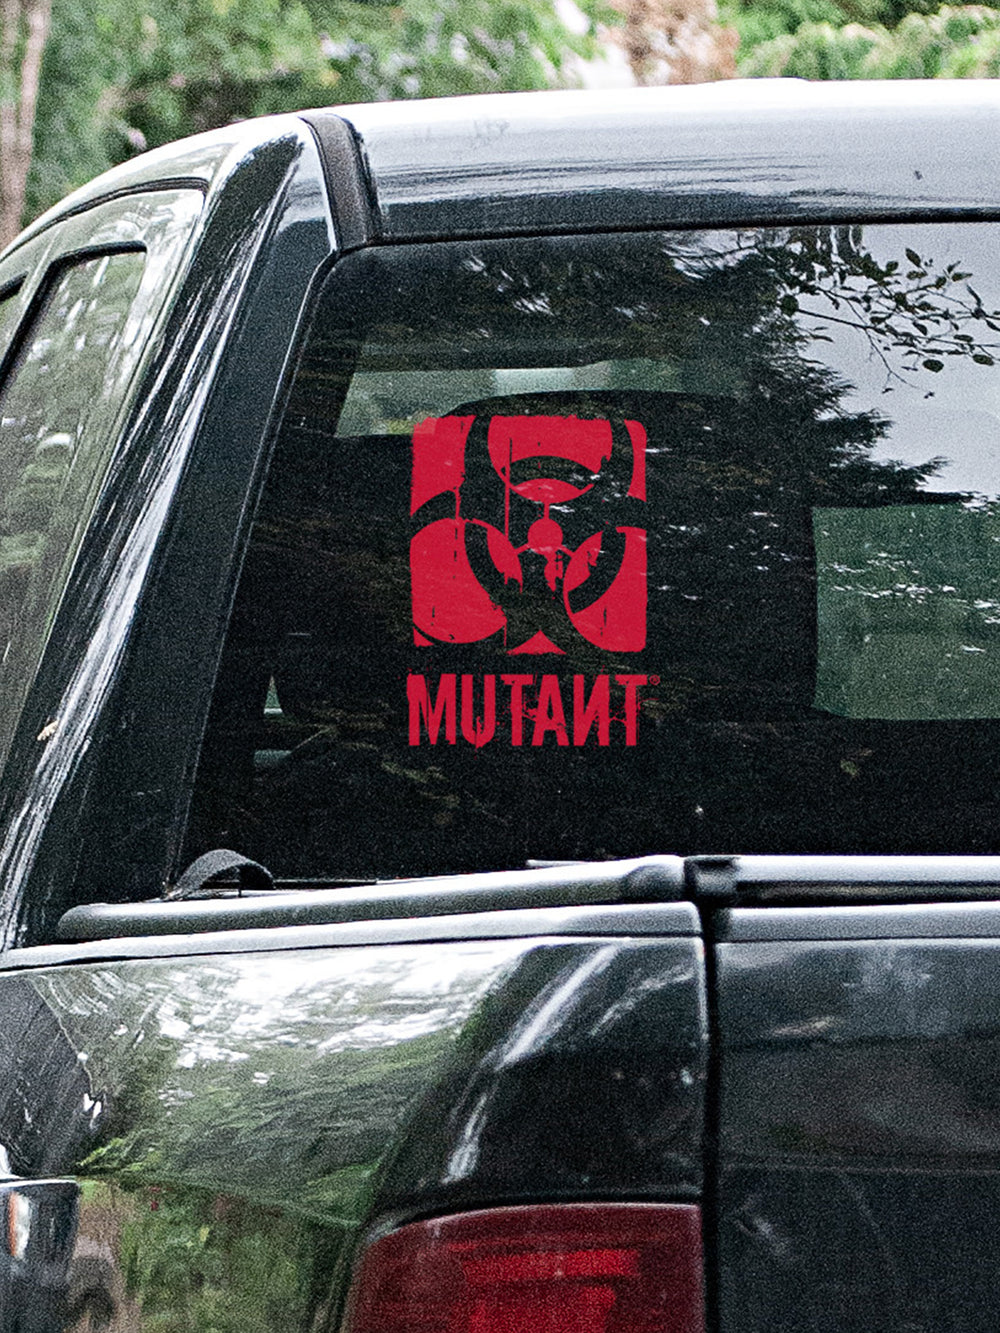 A photo showing the Rugged Truck Window Decal, which features the MUTANT logo in red, applied to the rear glass of a truck.